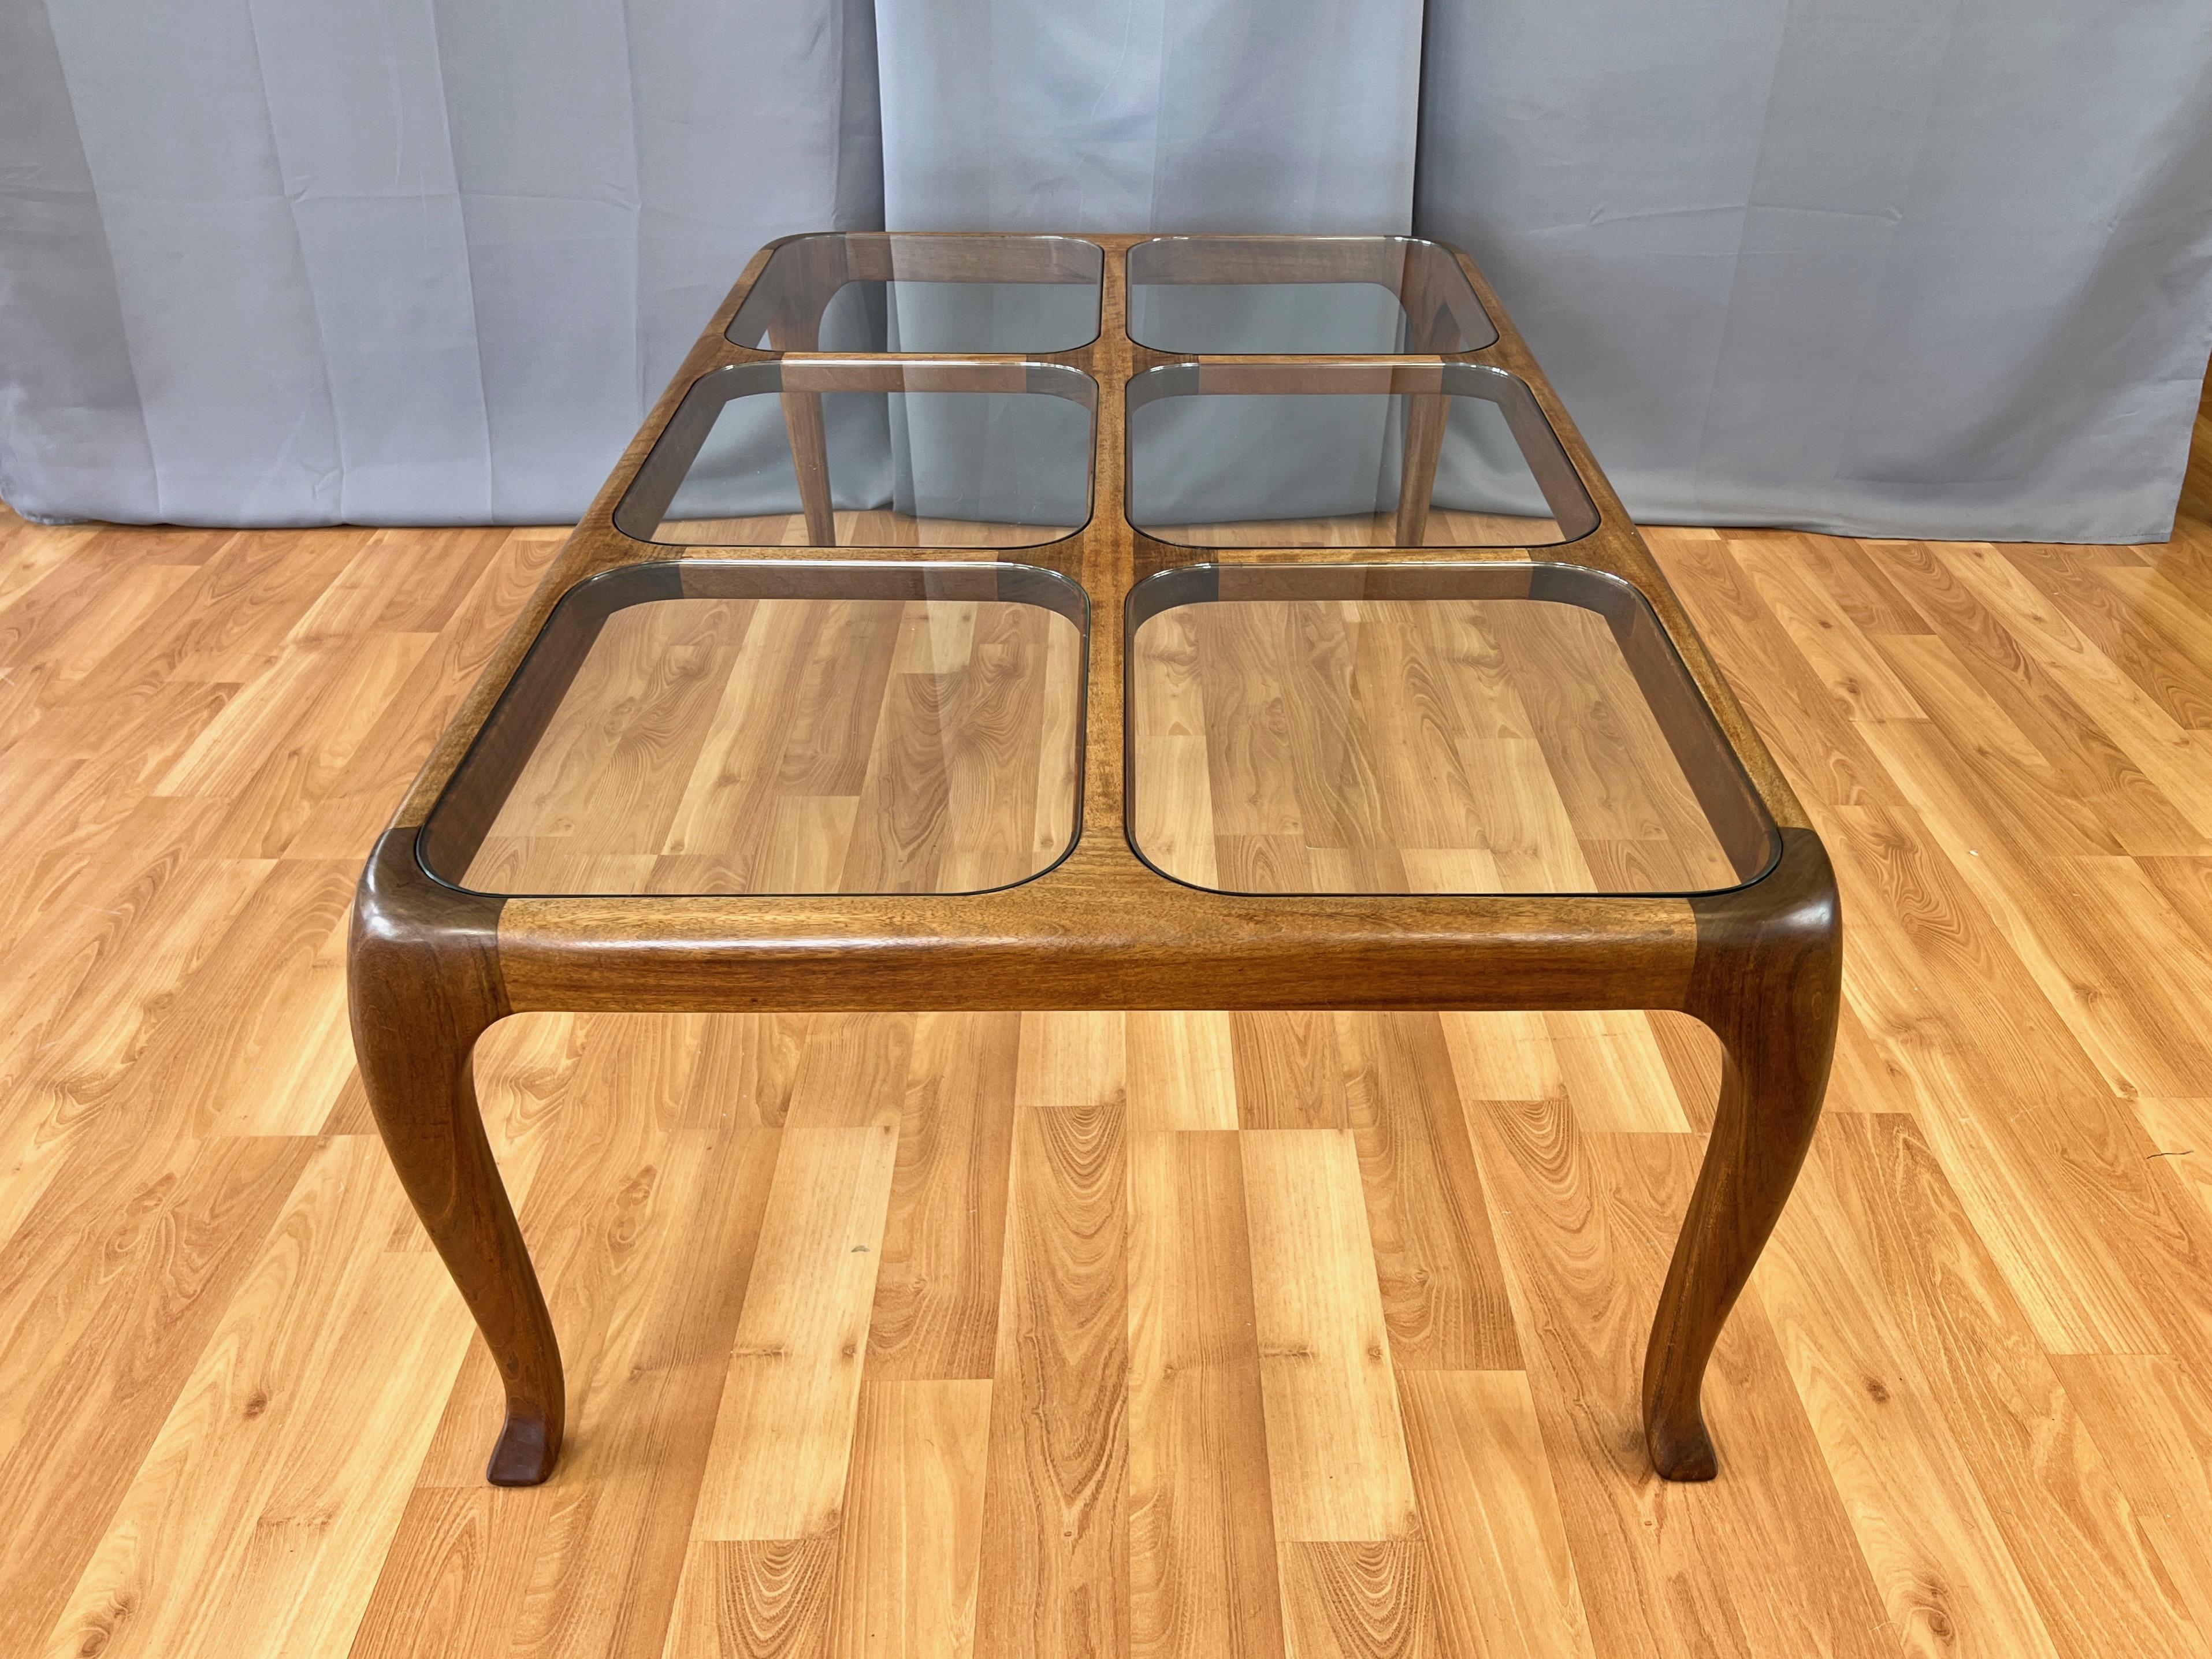 Thomas Saydah Large Walnut and Glass Coffee Table, Signed and Dated, 1982 For Sale 2